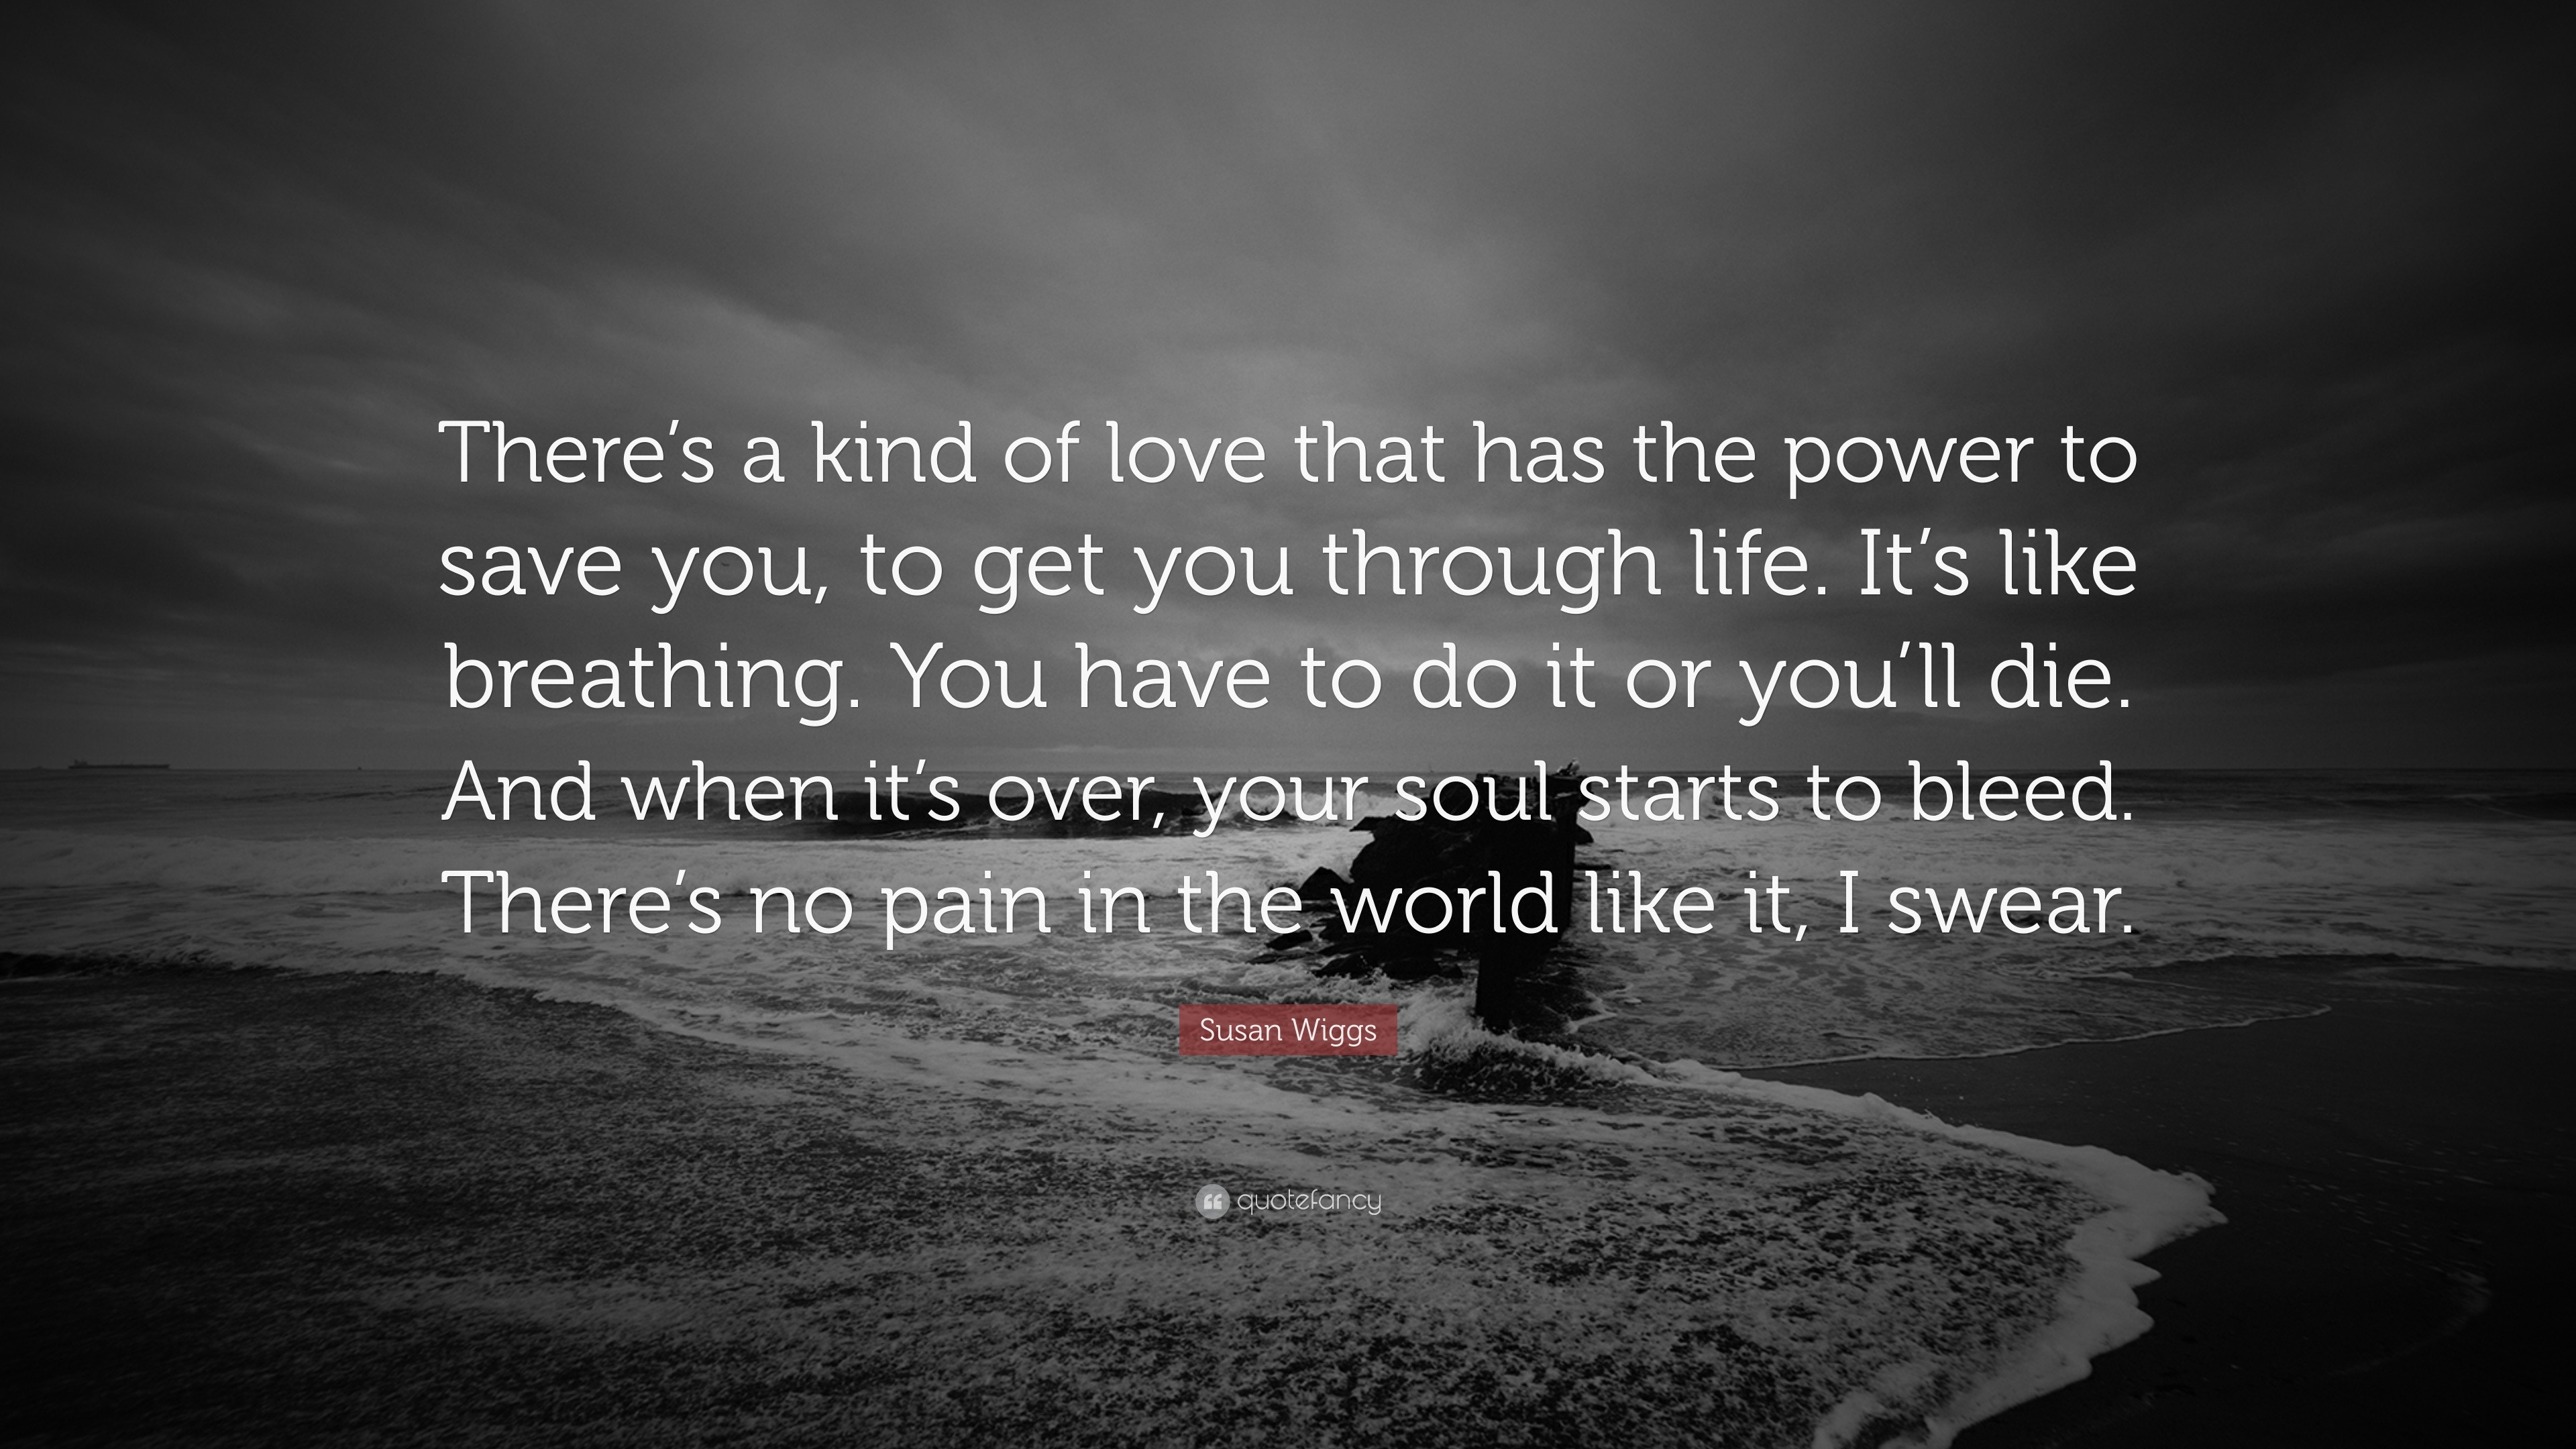 Susan Wiggs Quote “There s a kind of love that has the power to save